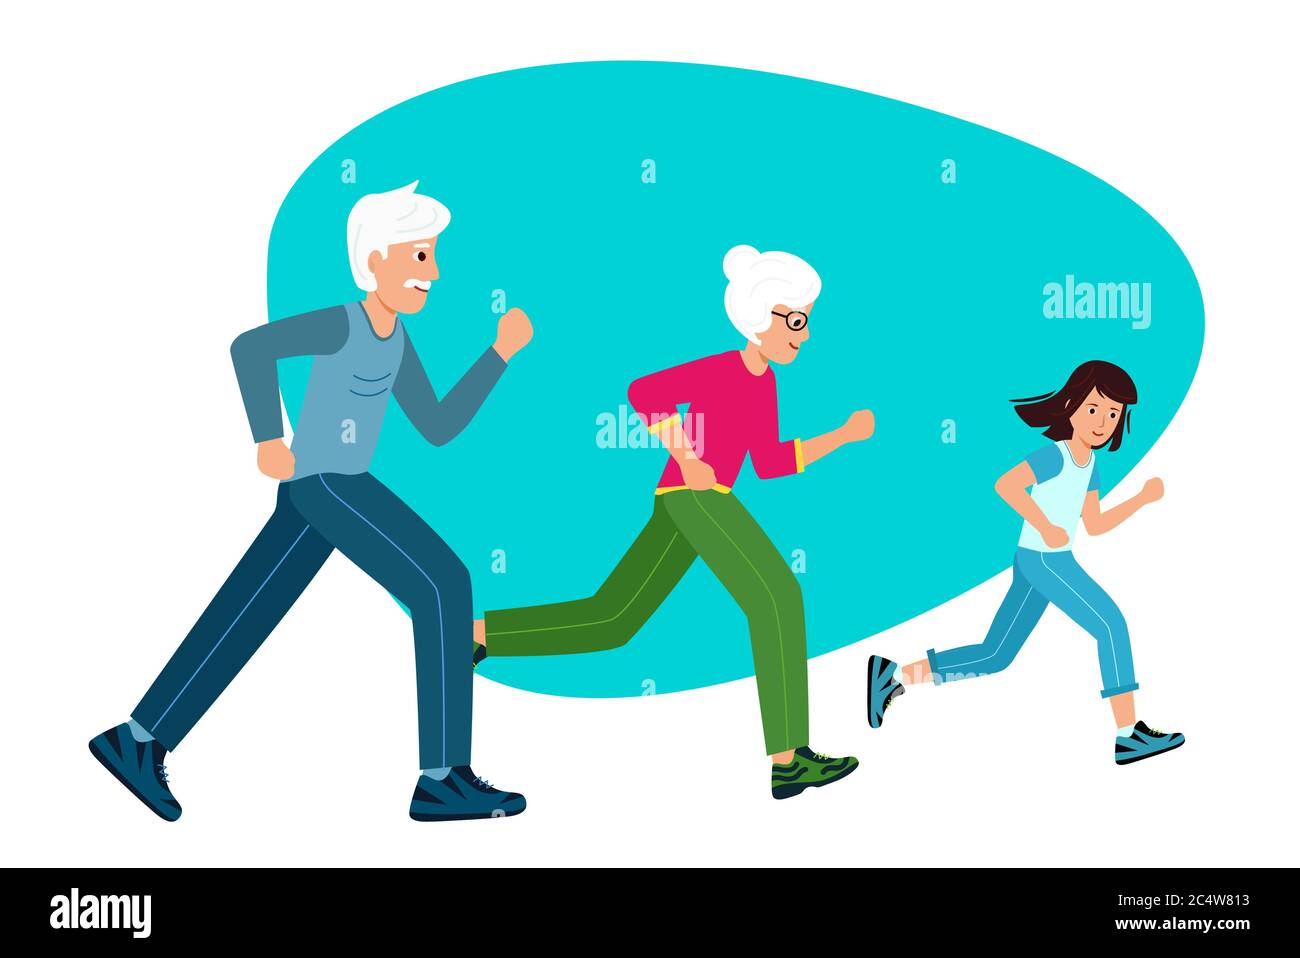 Family sports. Grandparents with a child running, the concept of a healthy lifestyle and longevity. Vector illustration in modern flat style. Stock Vector